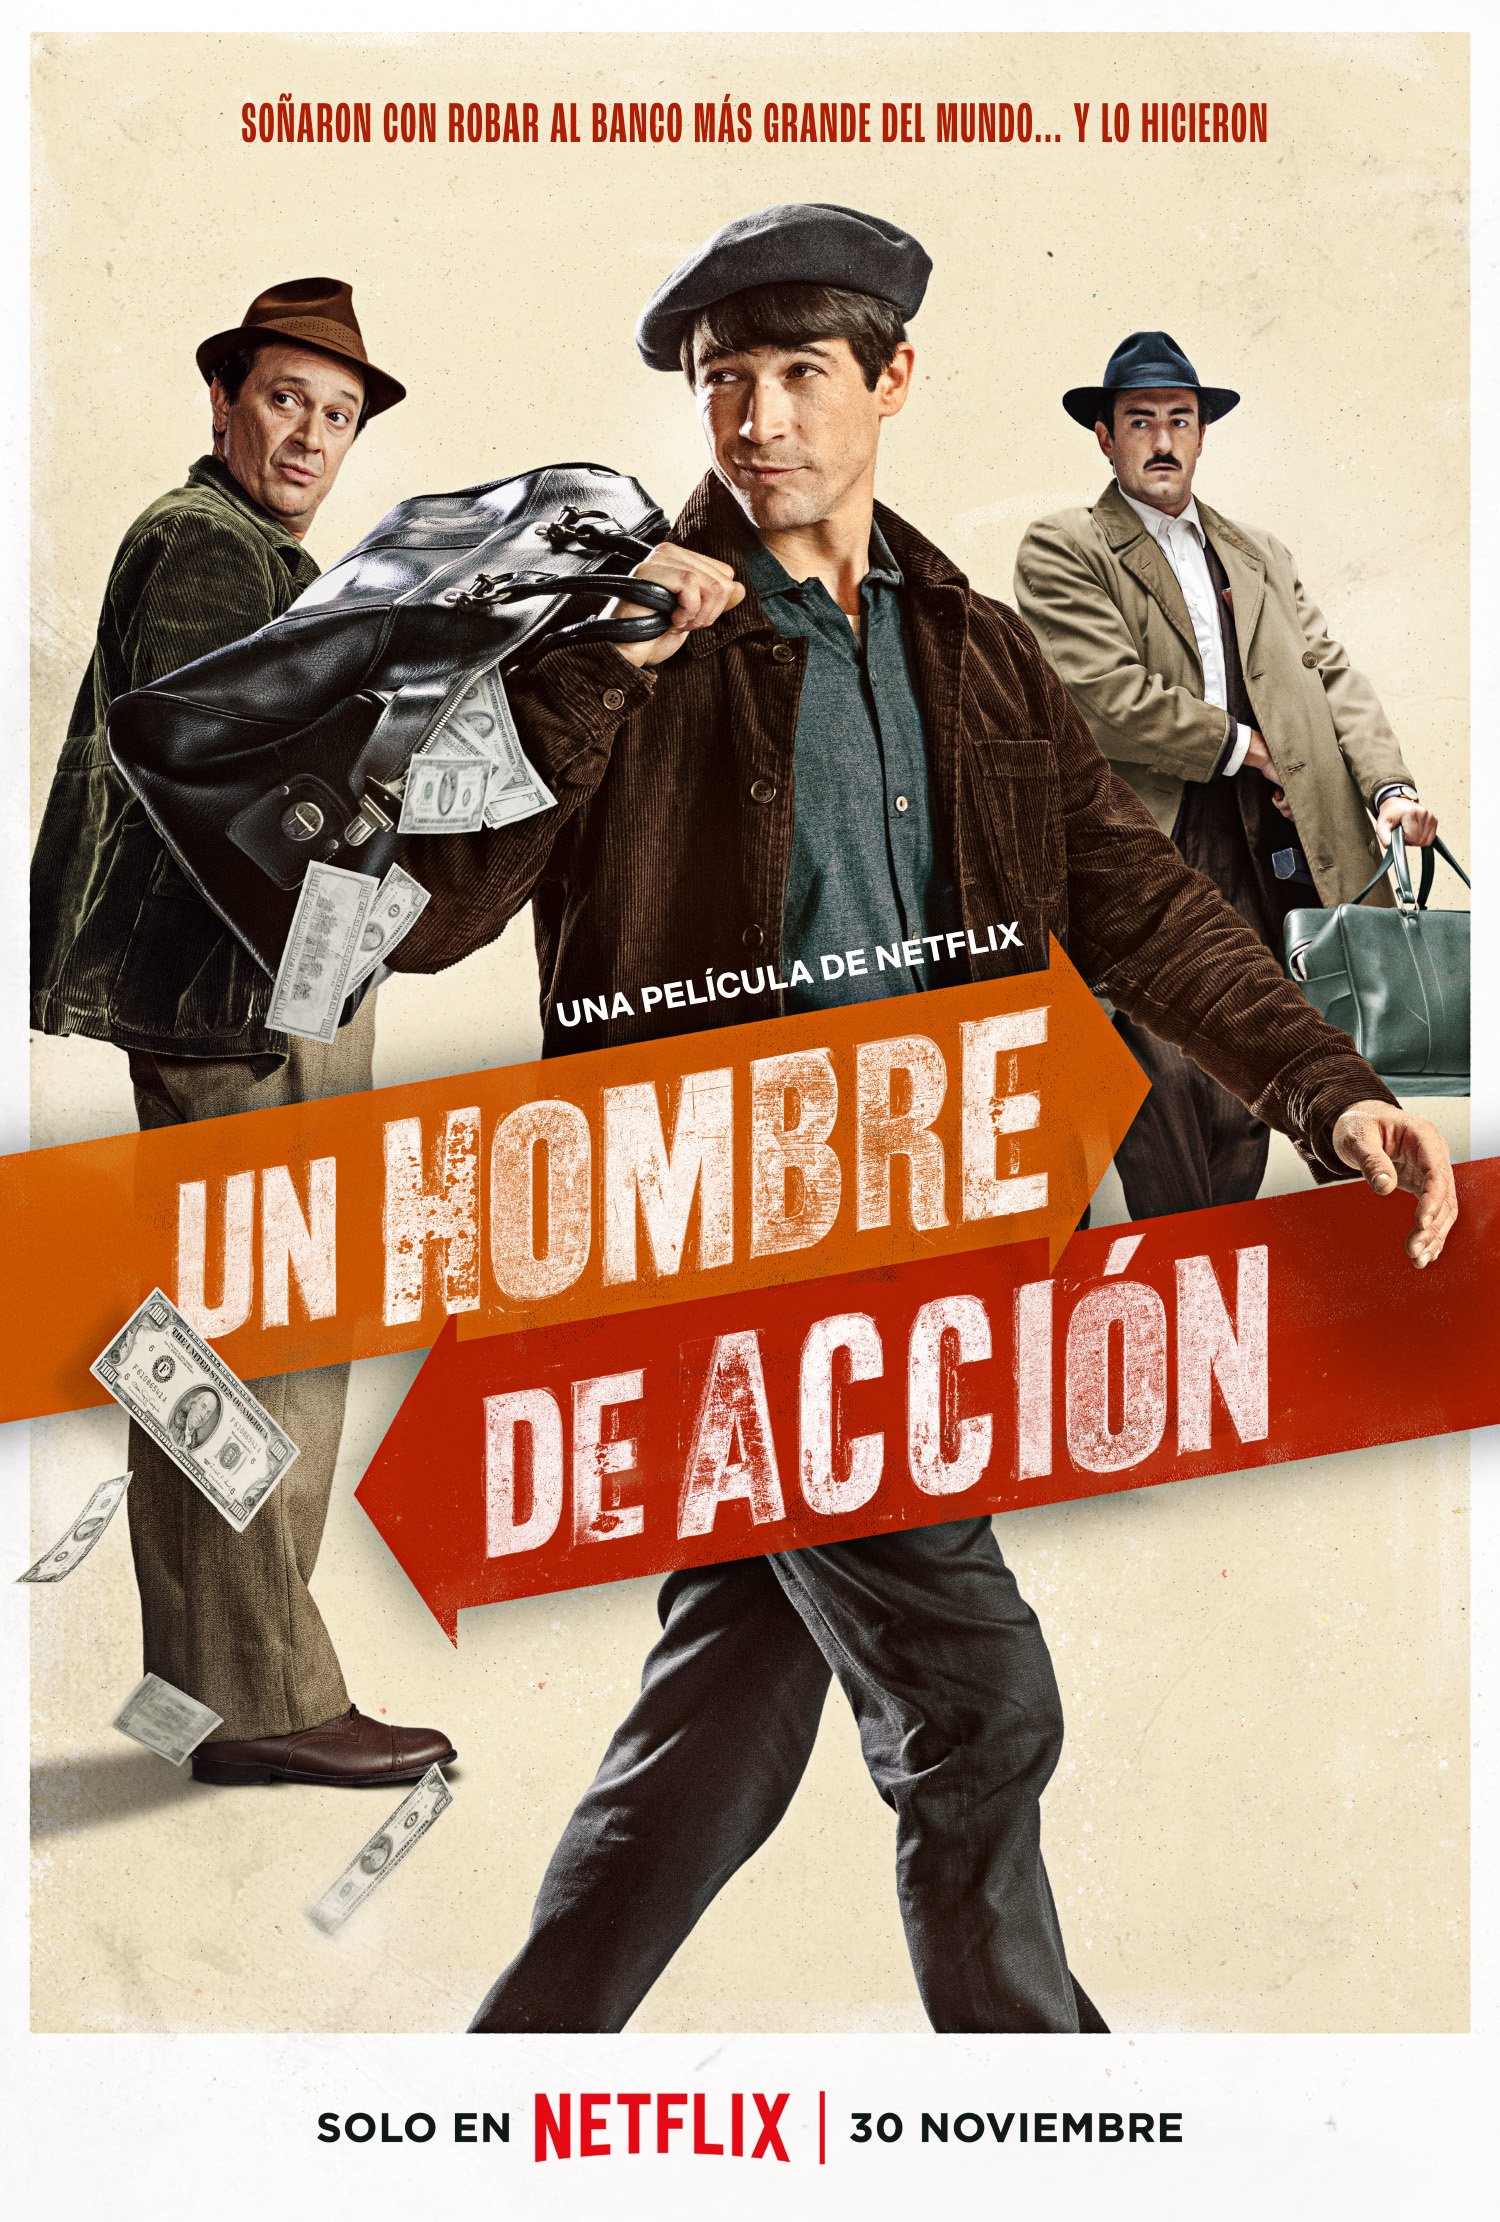 A Man of Action 2022 English Movie 1080p NF HDRip MSub 1.4GB Download